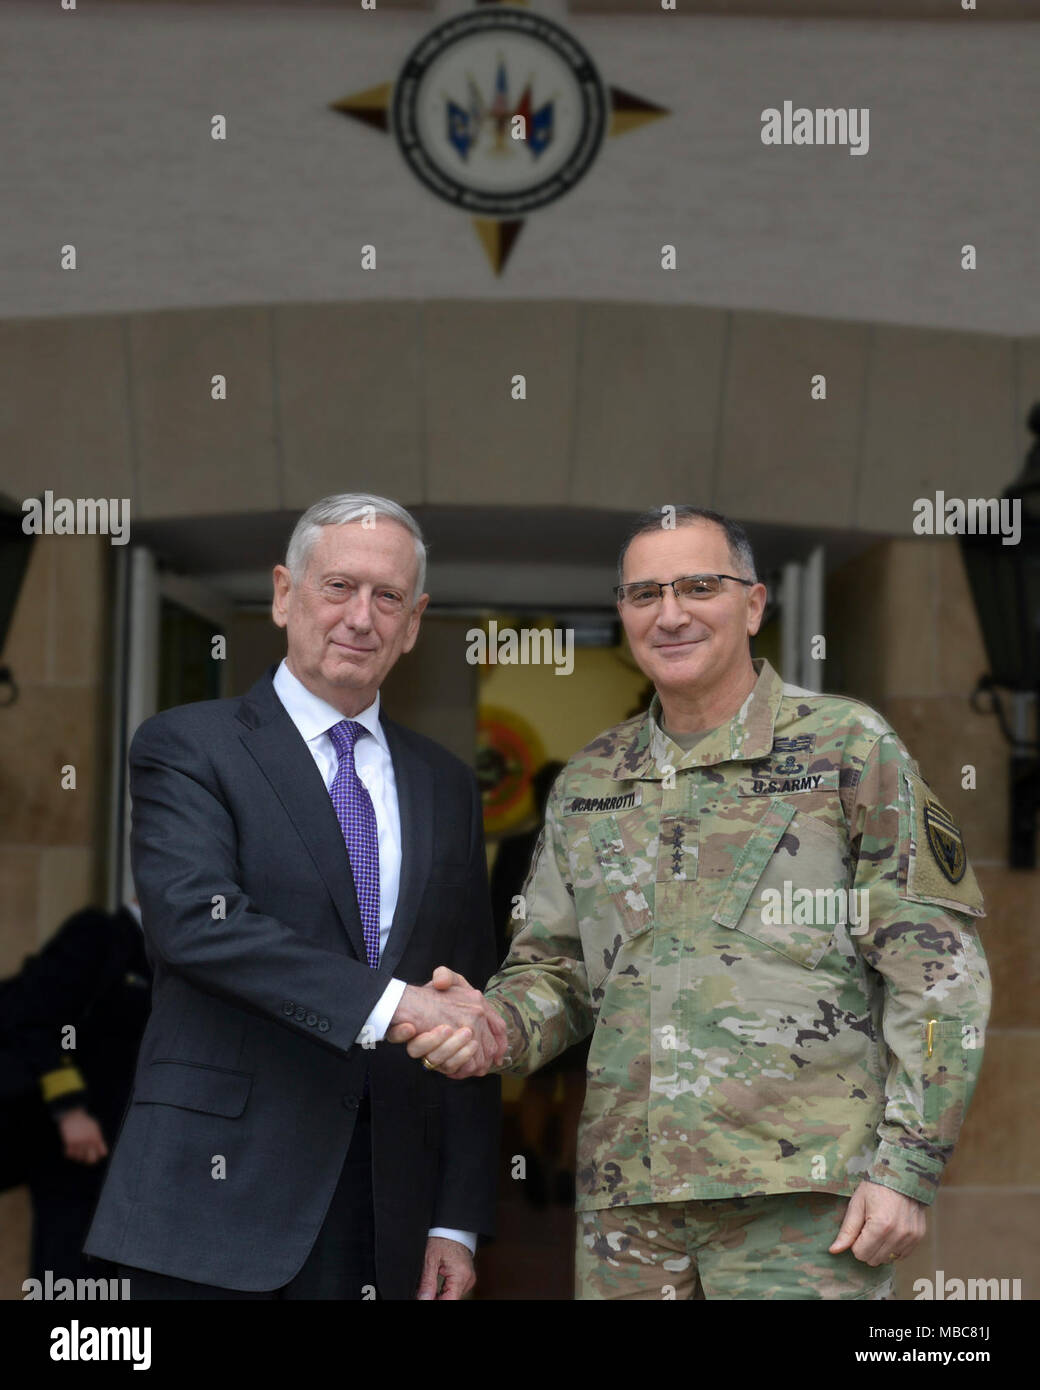 Secretary of Defense Jim Mattis greets Gen. Curtis Scaparrotti, Commander, U.S. European Command, during the Stuttgart, Germany stop of his trip to Europe February 15, 2018. Secretary Mattis's speech and following Q&A focused on support to NATO, ready forces and the concept that 'Deterrence is Dynamic'. (U.S. Army Stock Photo